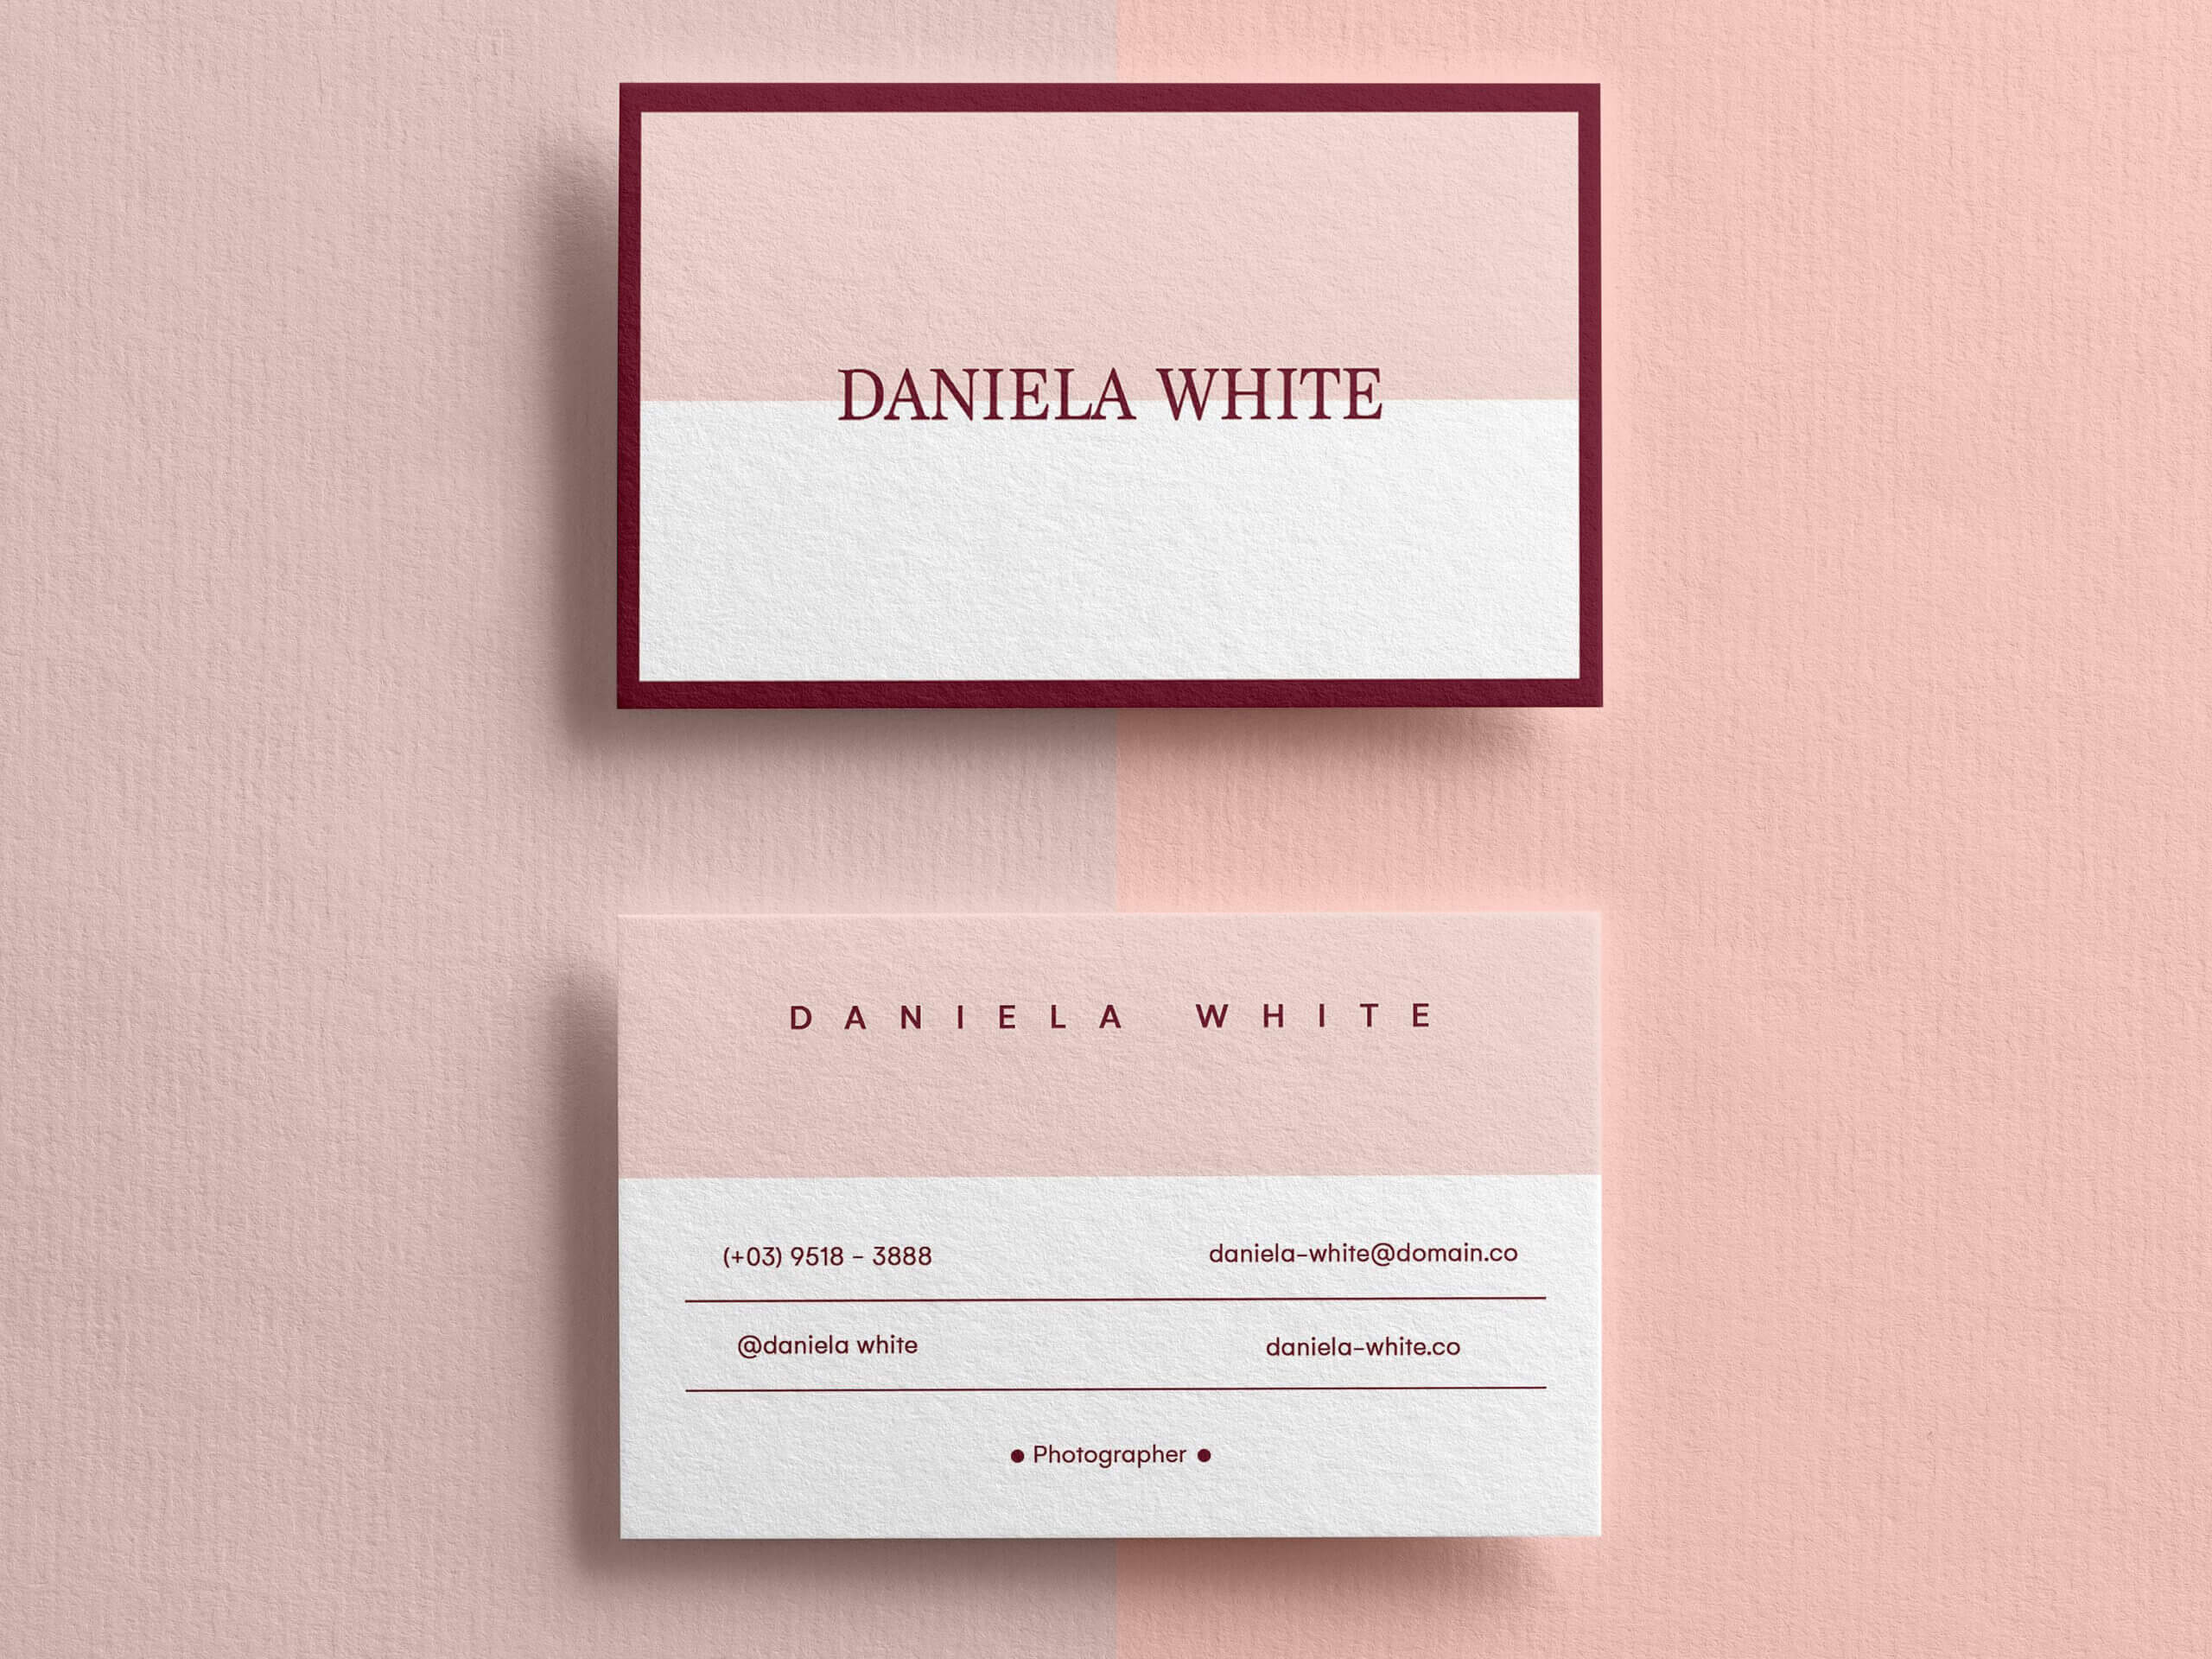 008 Business Card Template Photoshop Fascinating Ideas Blank Inside Business Card Template Photoshop Cs6